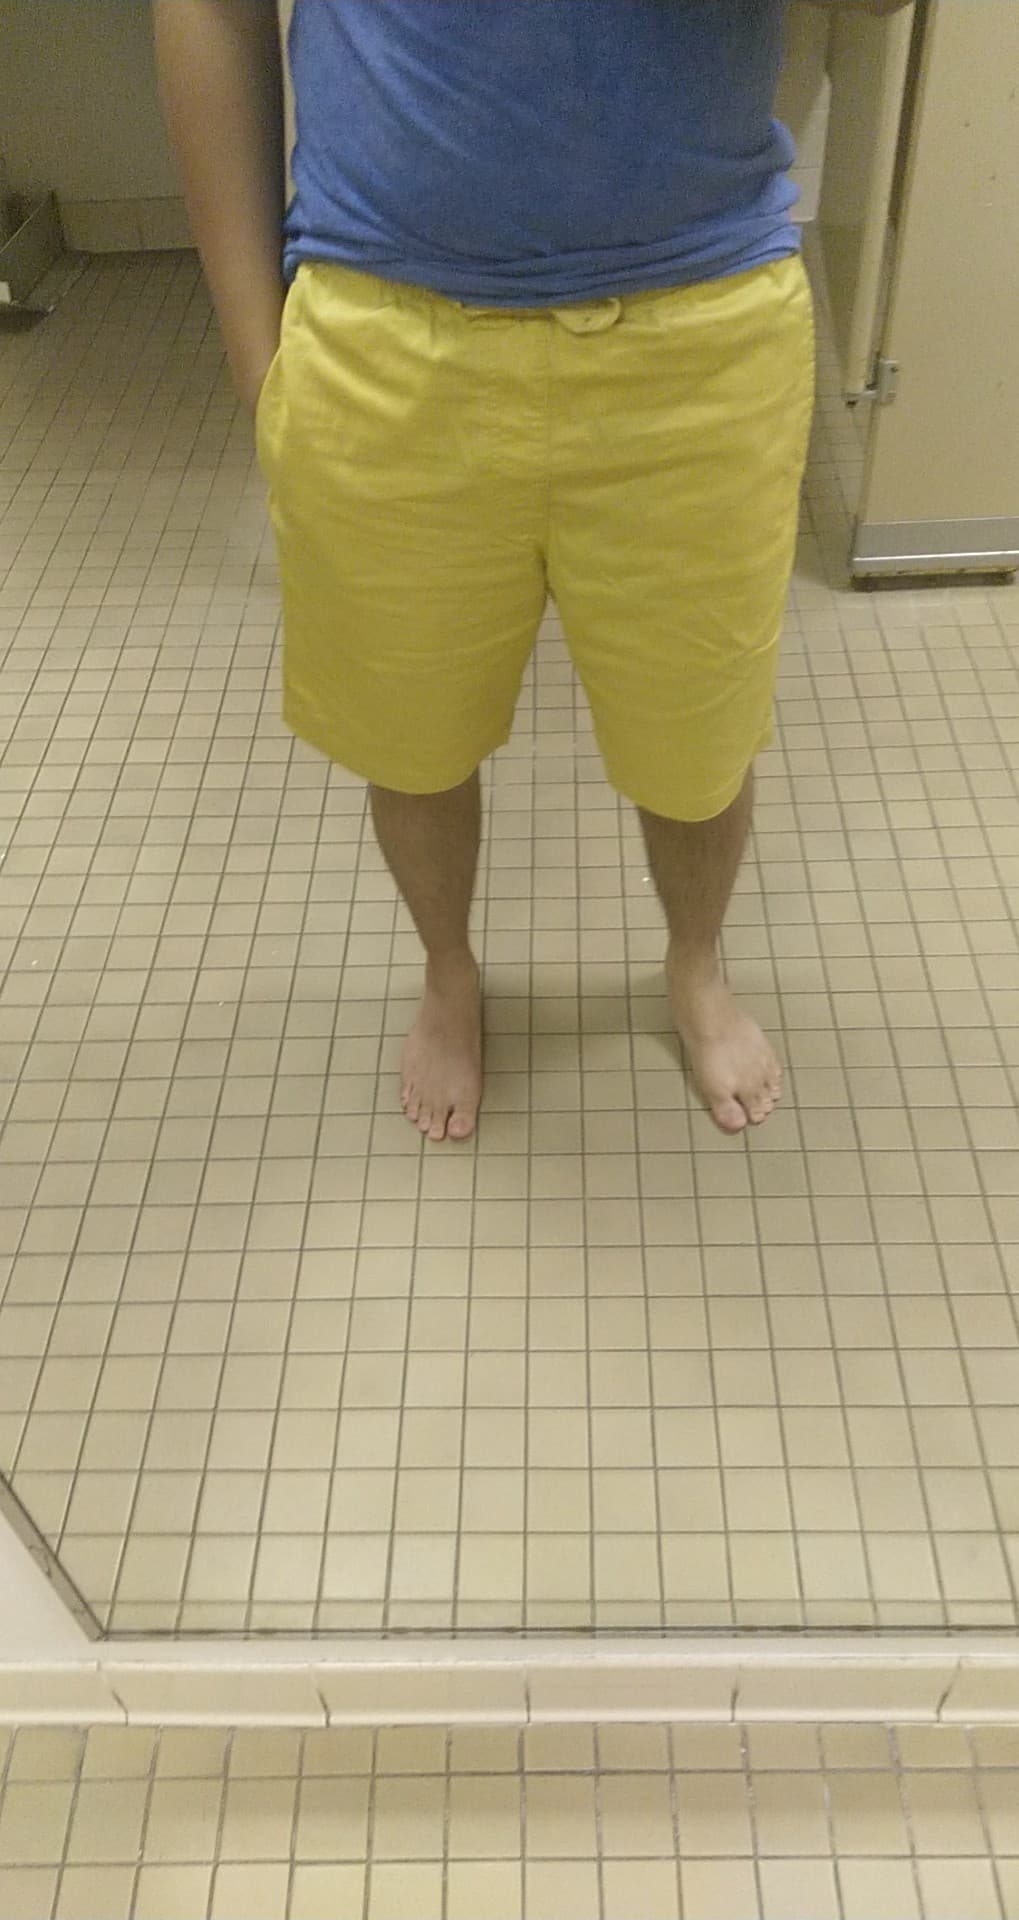 a picture of my lower body in the mirror. i'm barefoot, and wearing bright yellow shorts